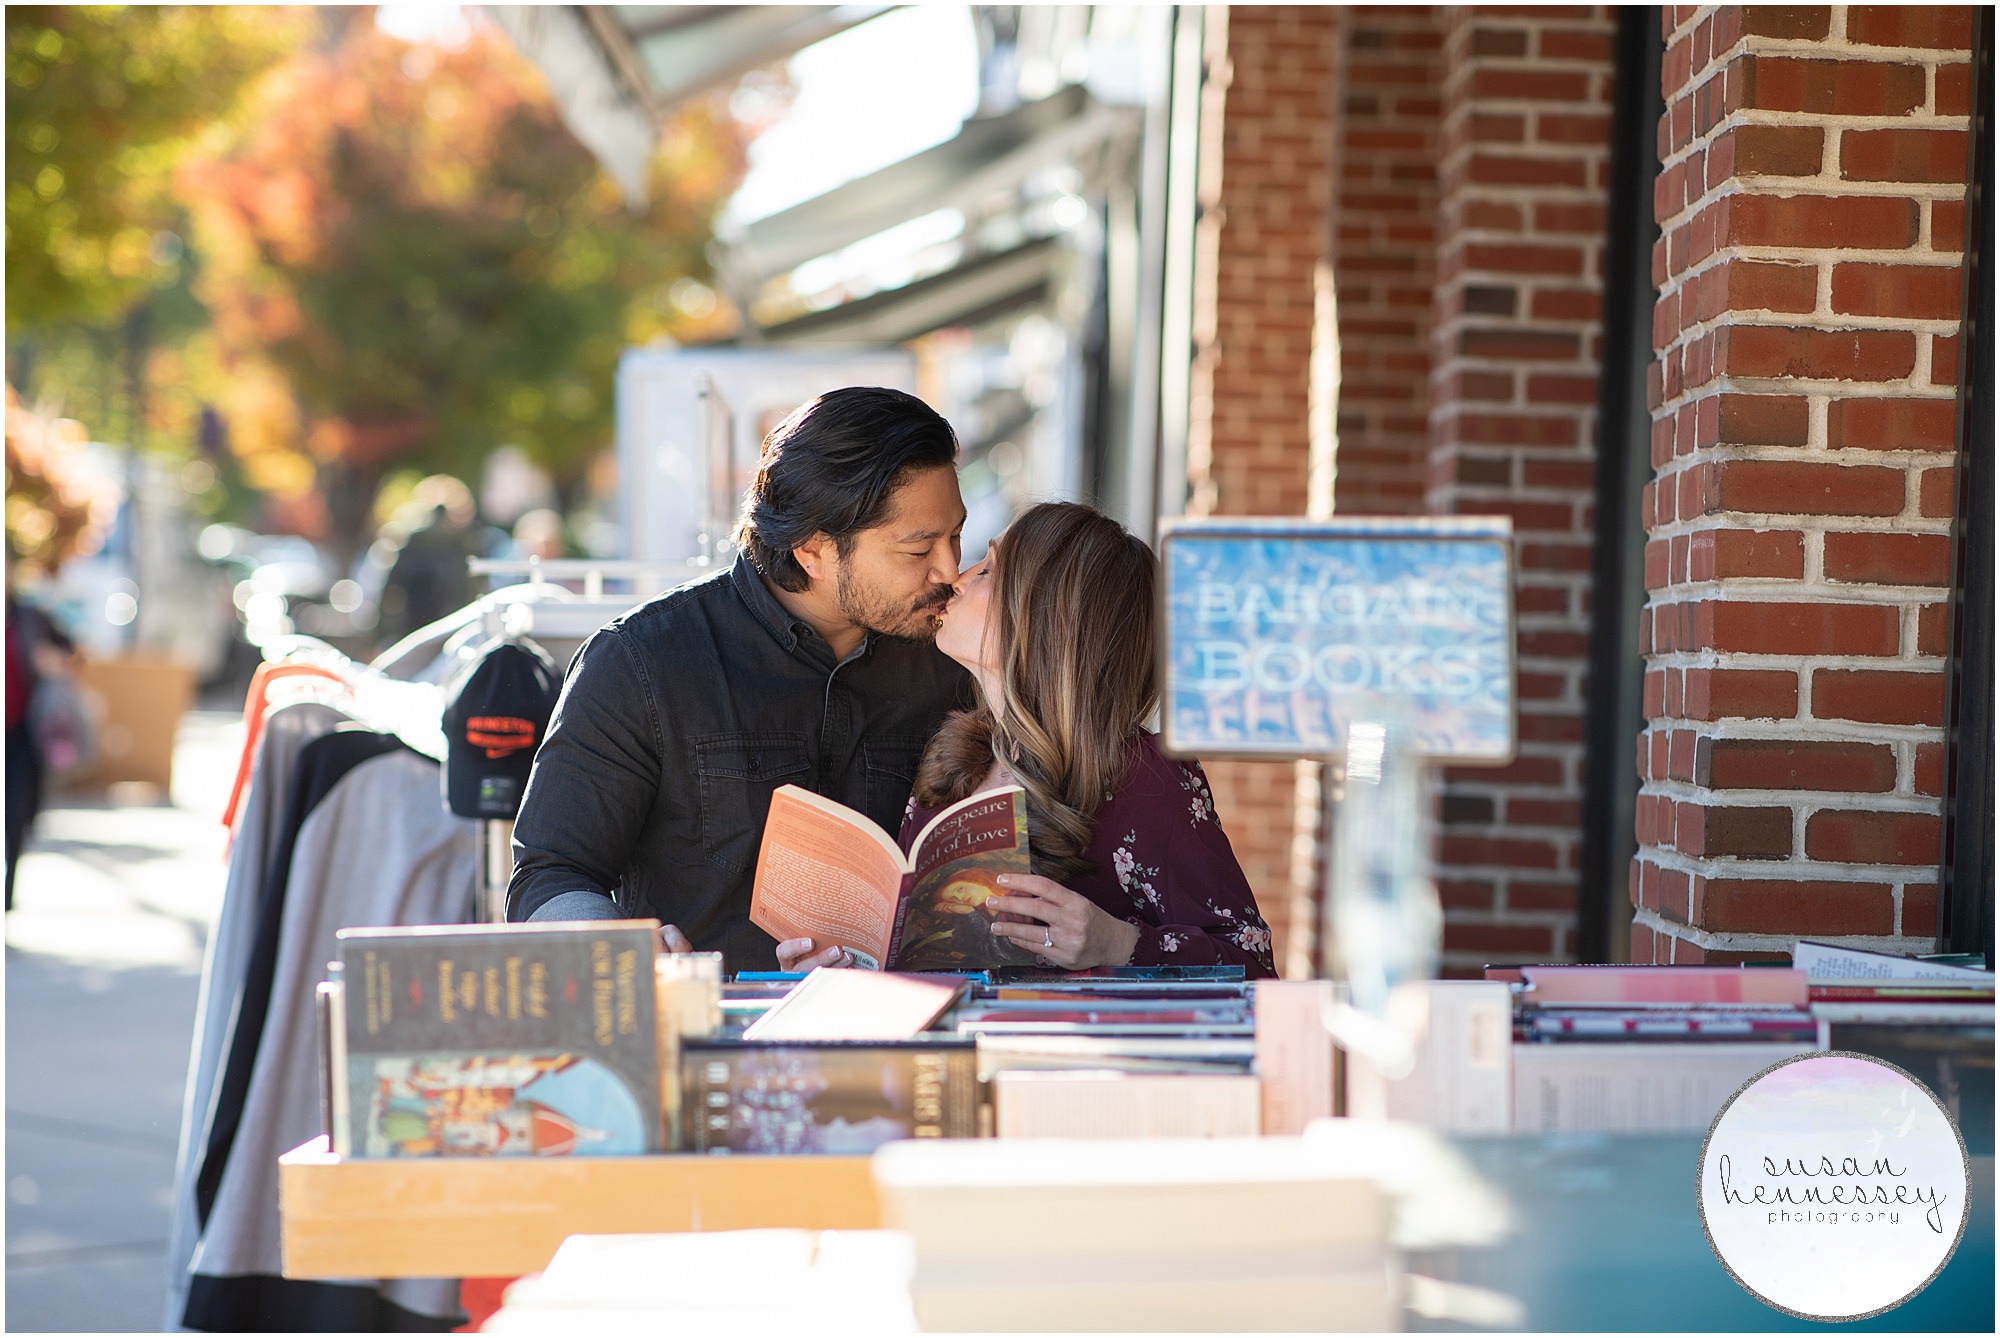 An engaged couple at a Princeton book store